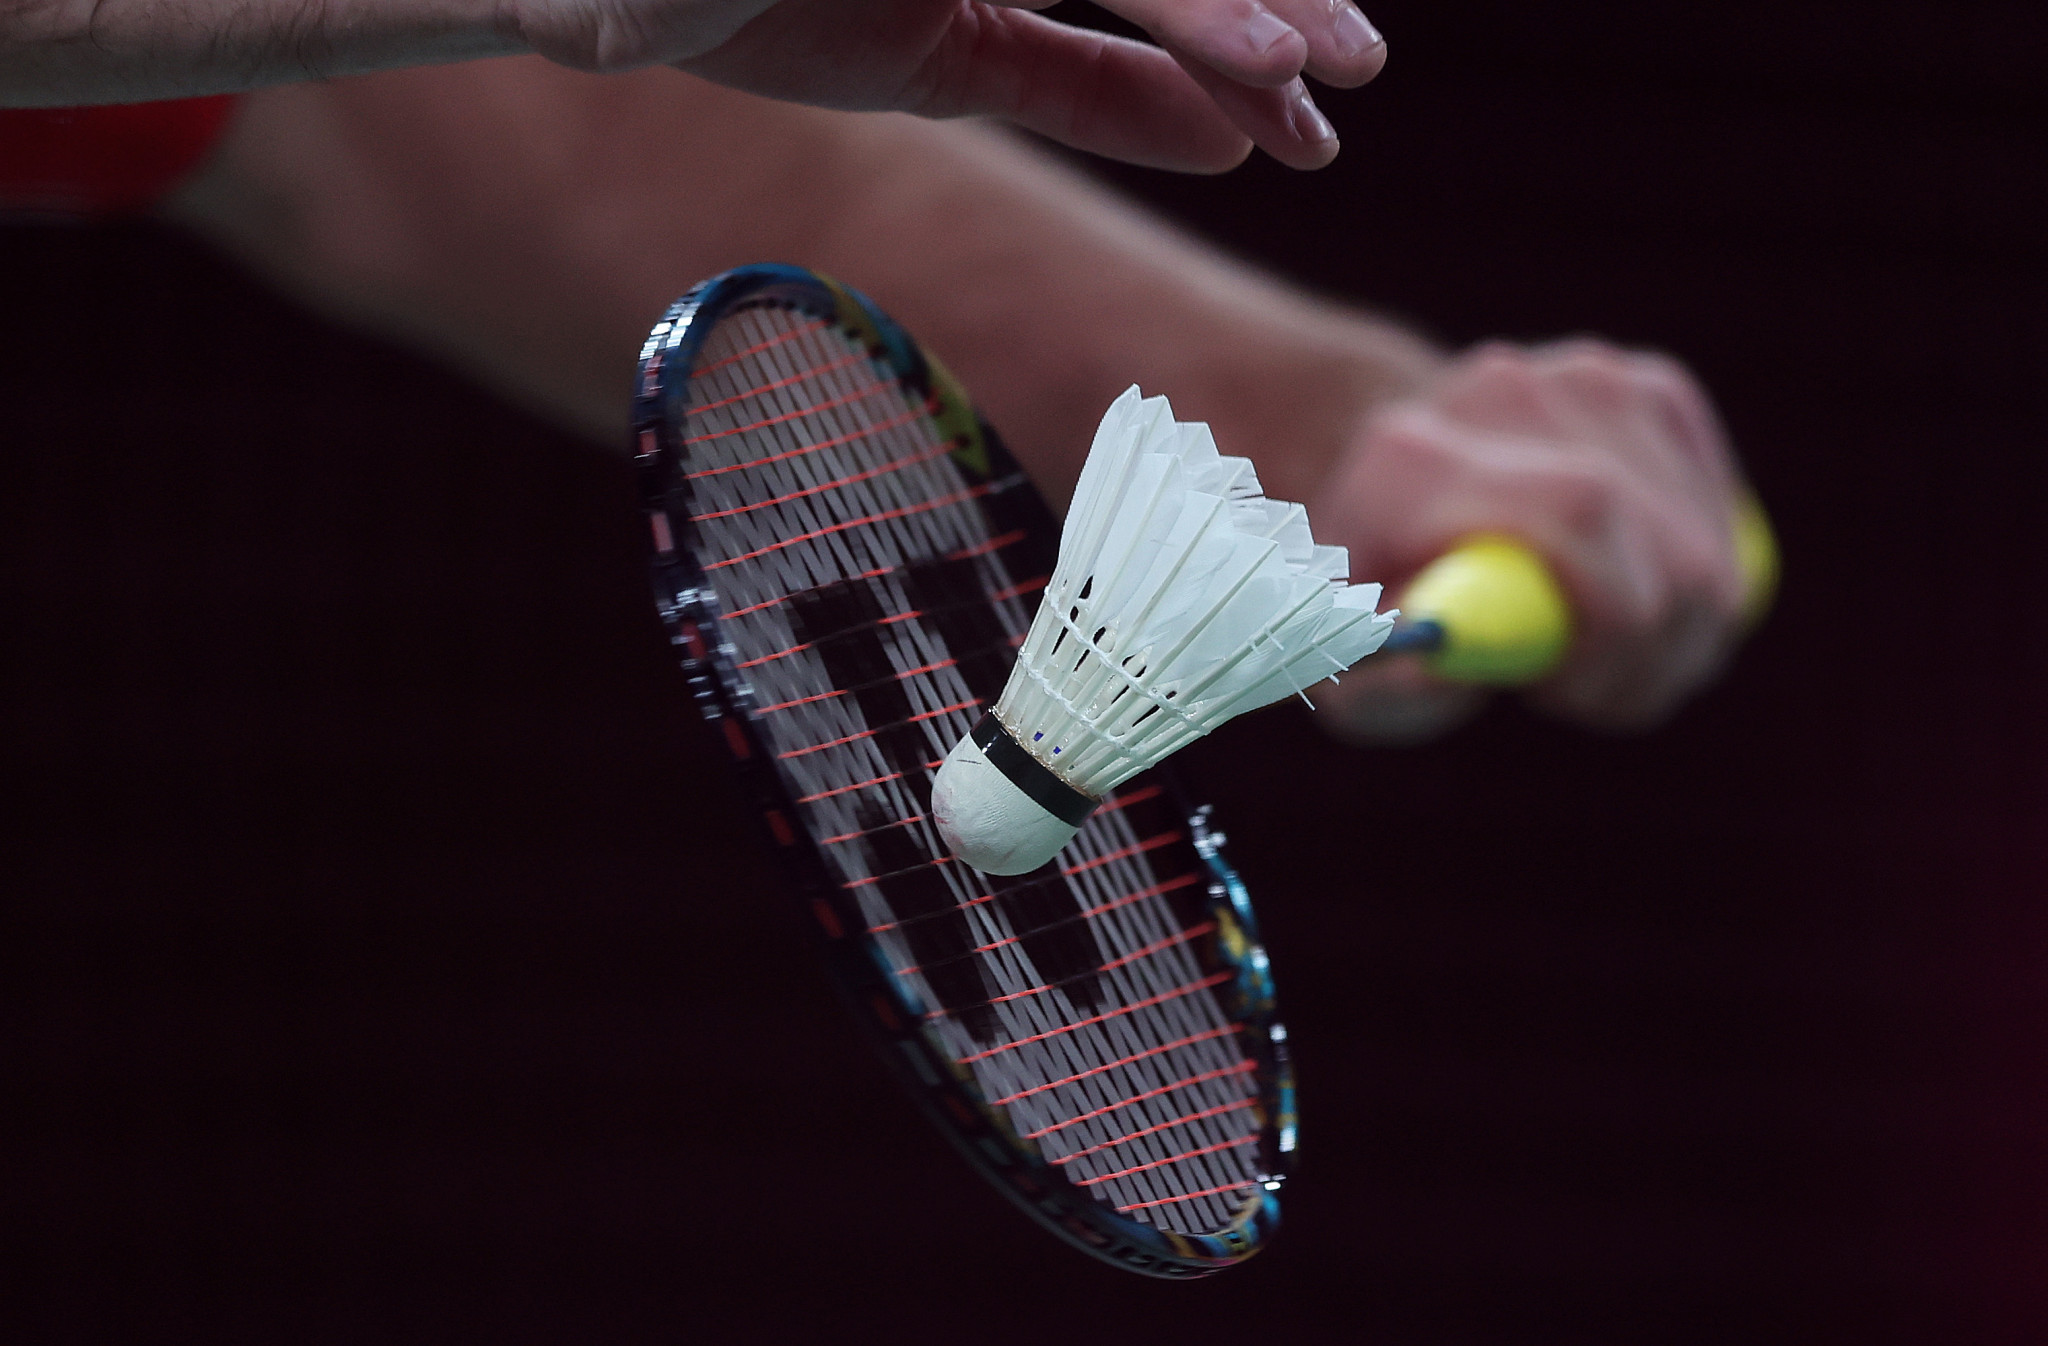 Thailand is set to host the Badminton World Federation World Tour Finals in December on short notice ©UTS 